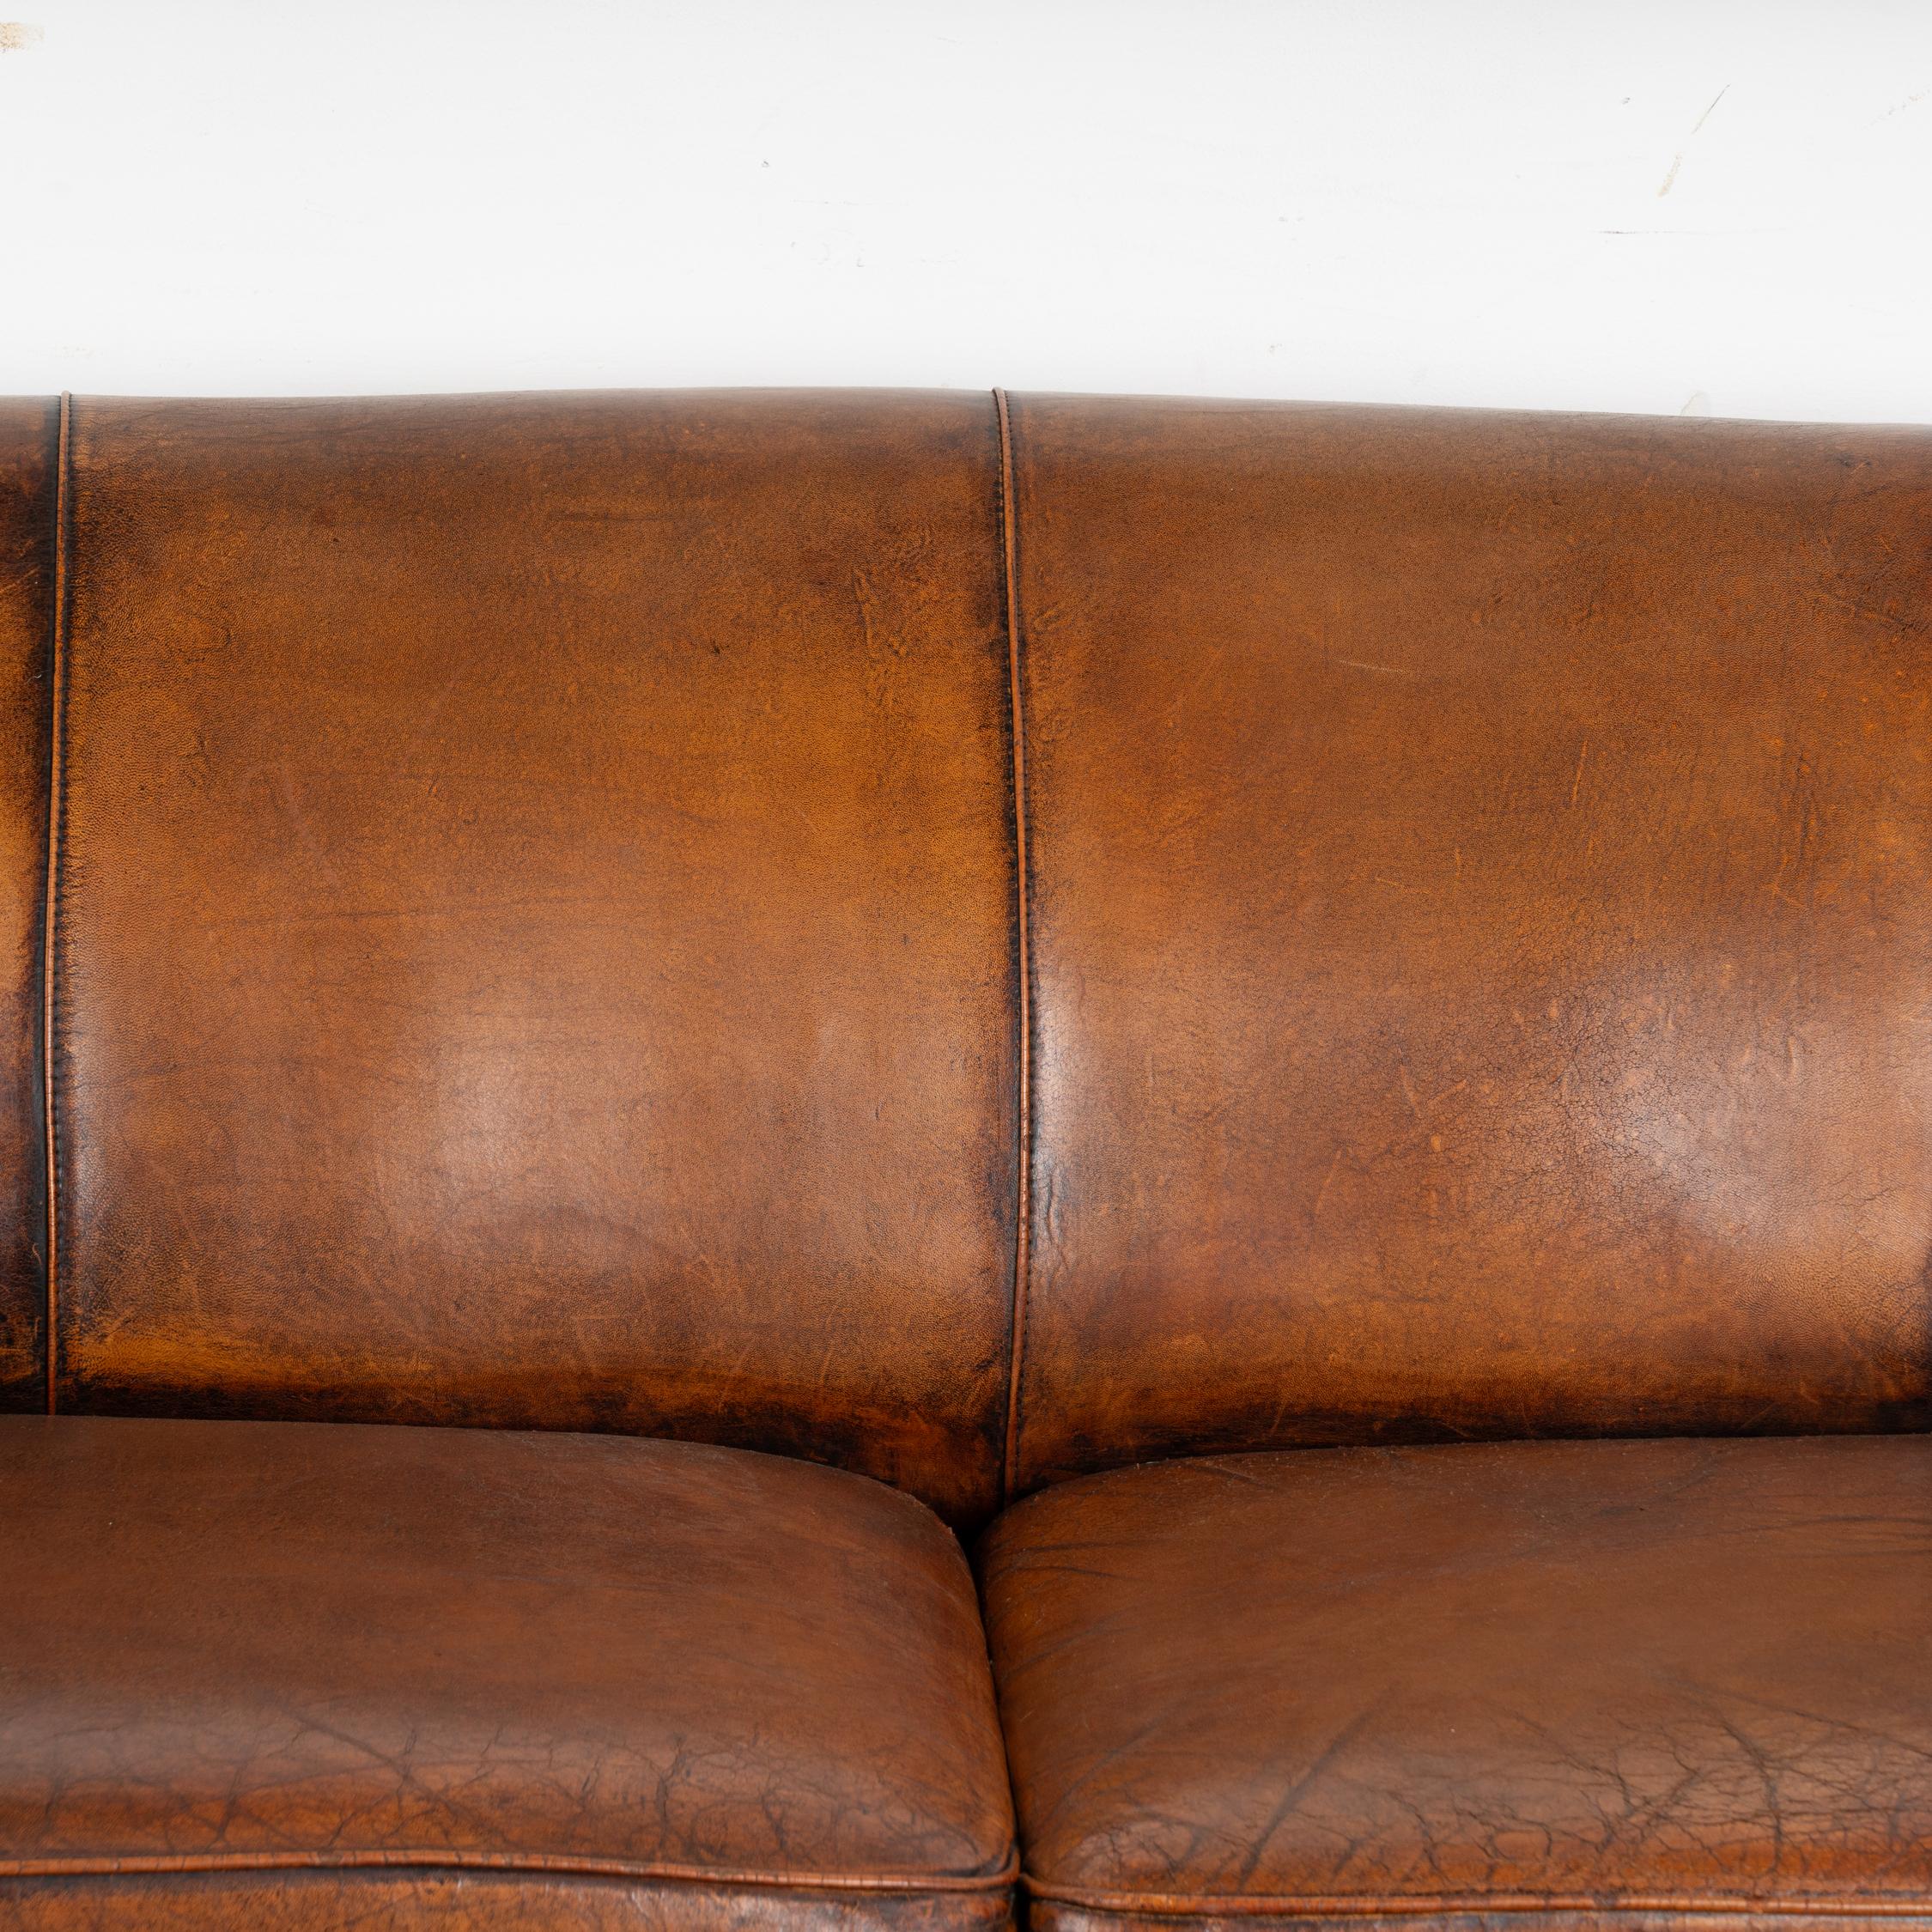 Vintage Brown Leather 2-Seat Sofa Loveseat from The Netherlands, circa 1960-70 2